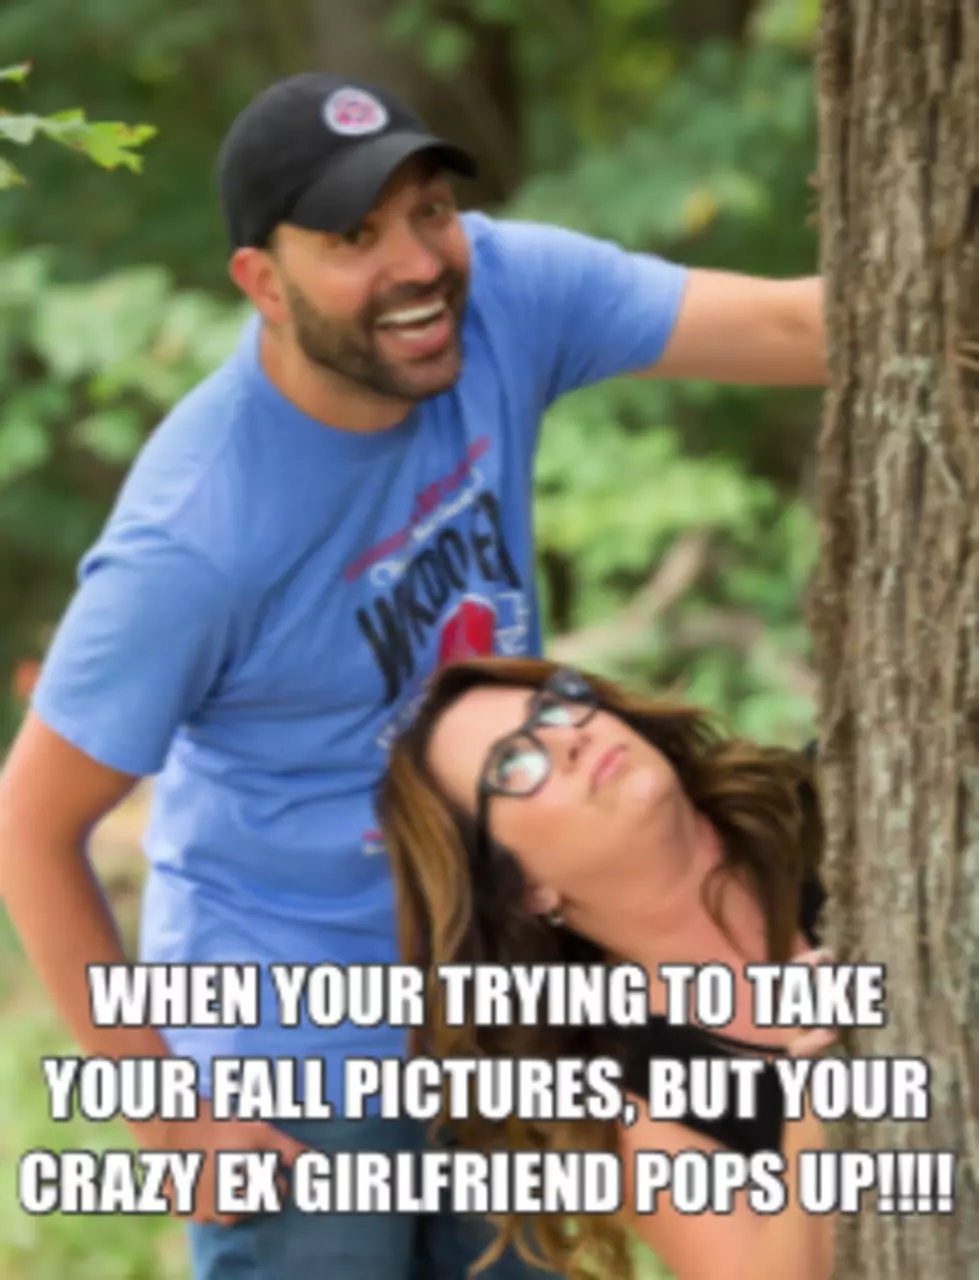 Which Dave and Leslie Meme Do You Like The Best? &#8211; VOTE